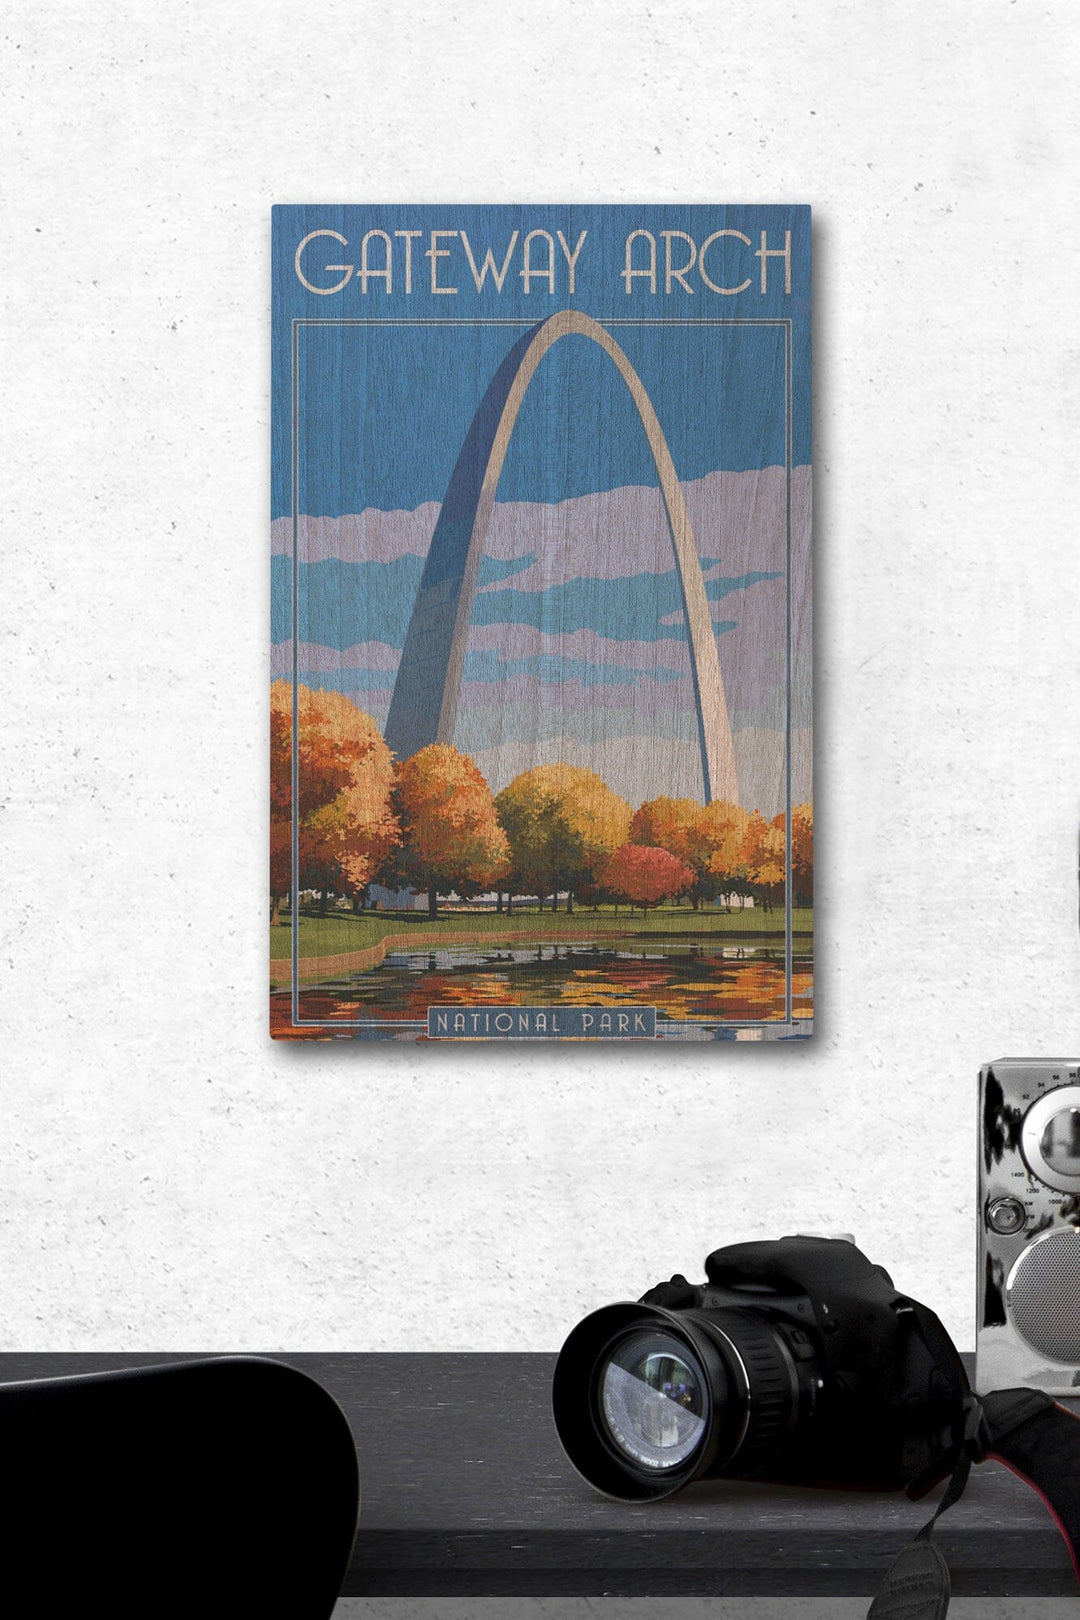 Gateway Arch National Park, Arch and Trees in Fall, Lantern Press Artwork, Wood Signs and Postcards Wood Lantern Press 12 x 18 Wood Gallery Print 